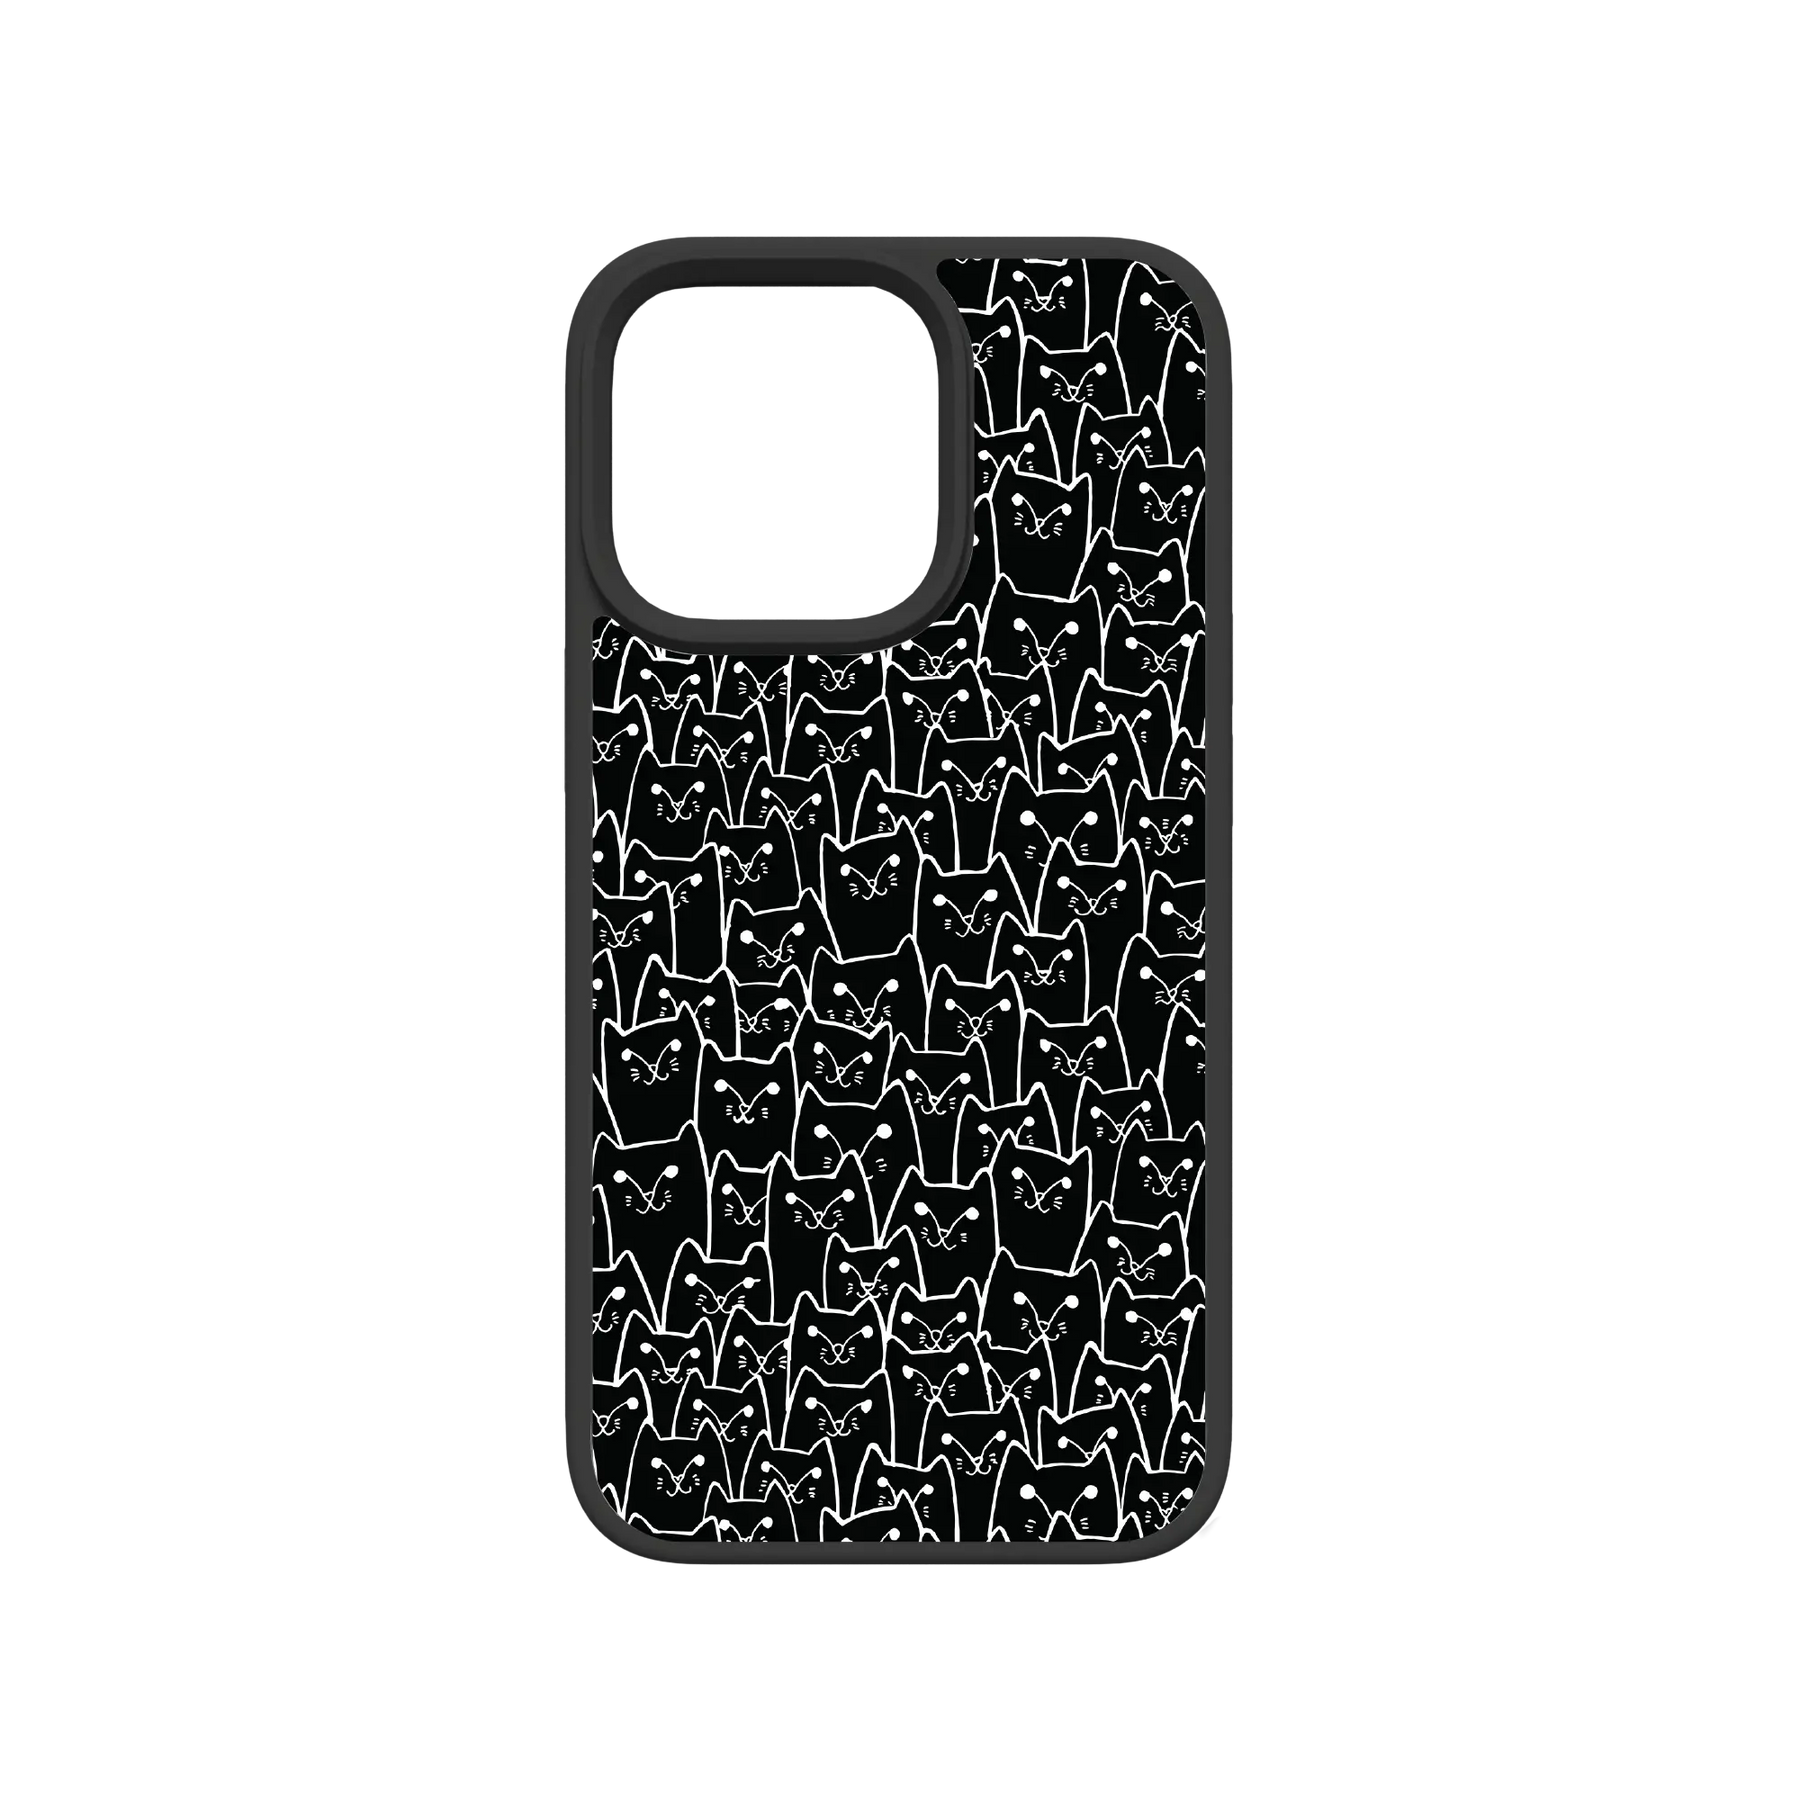 Apple-iPhone-13-Pro-Crystal-Clear Black Cat Pattern | Protective MagSafe Case | Cats Meow Series for Apple iPhone 13 Series cellhelmet cellhelmet